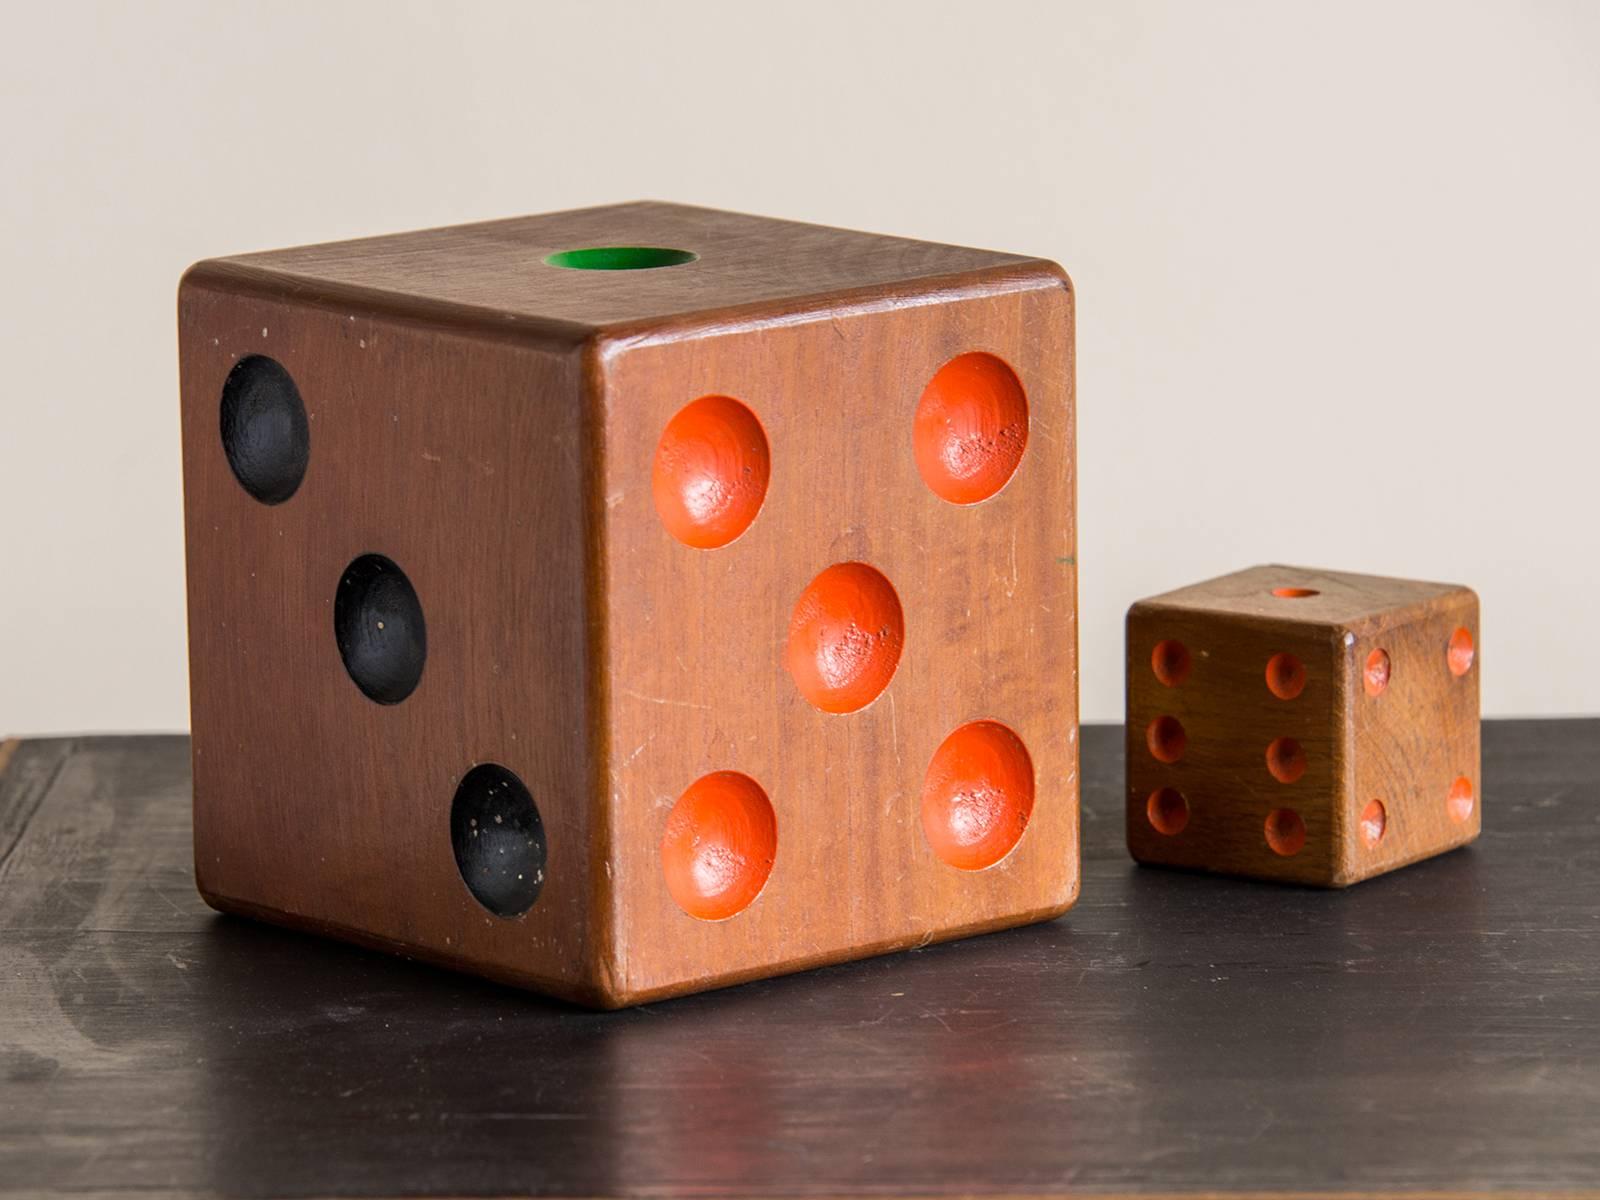 A collection of two vintage wooden dice from France, circa 1940. Please notice the intriguing differences both in the scale of these two dice as well as the combination of paint used to highlight their background and numbered sides. These were